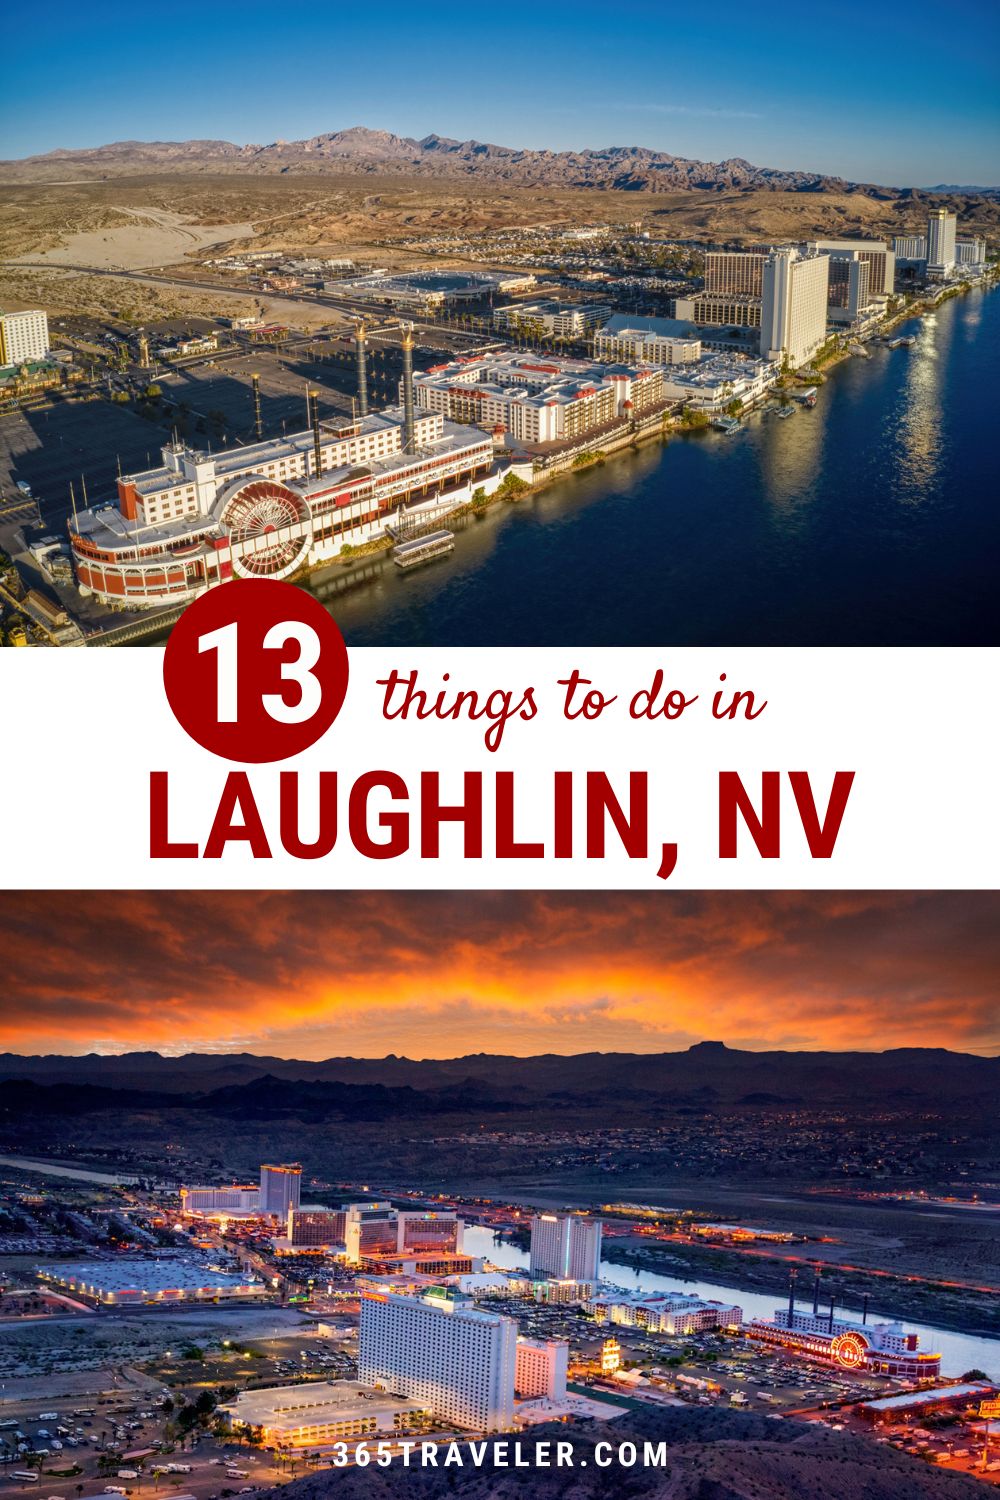 13 PHENOMENAL THINGS TO DO IN LAUGHLIN, NEVADA